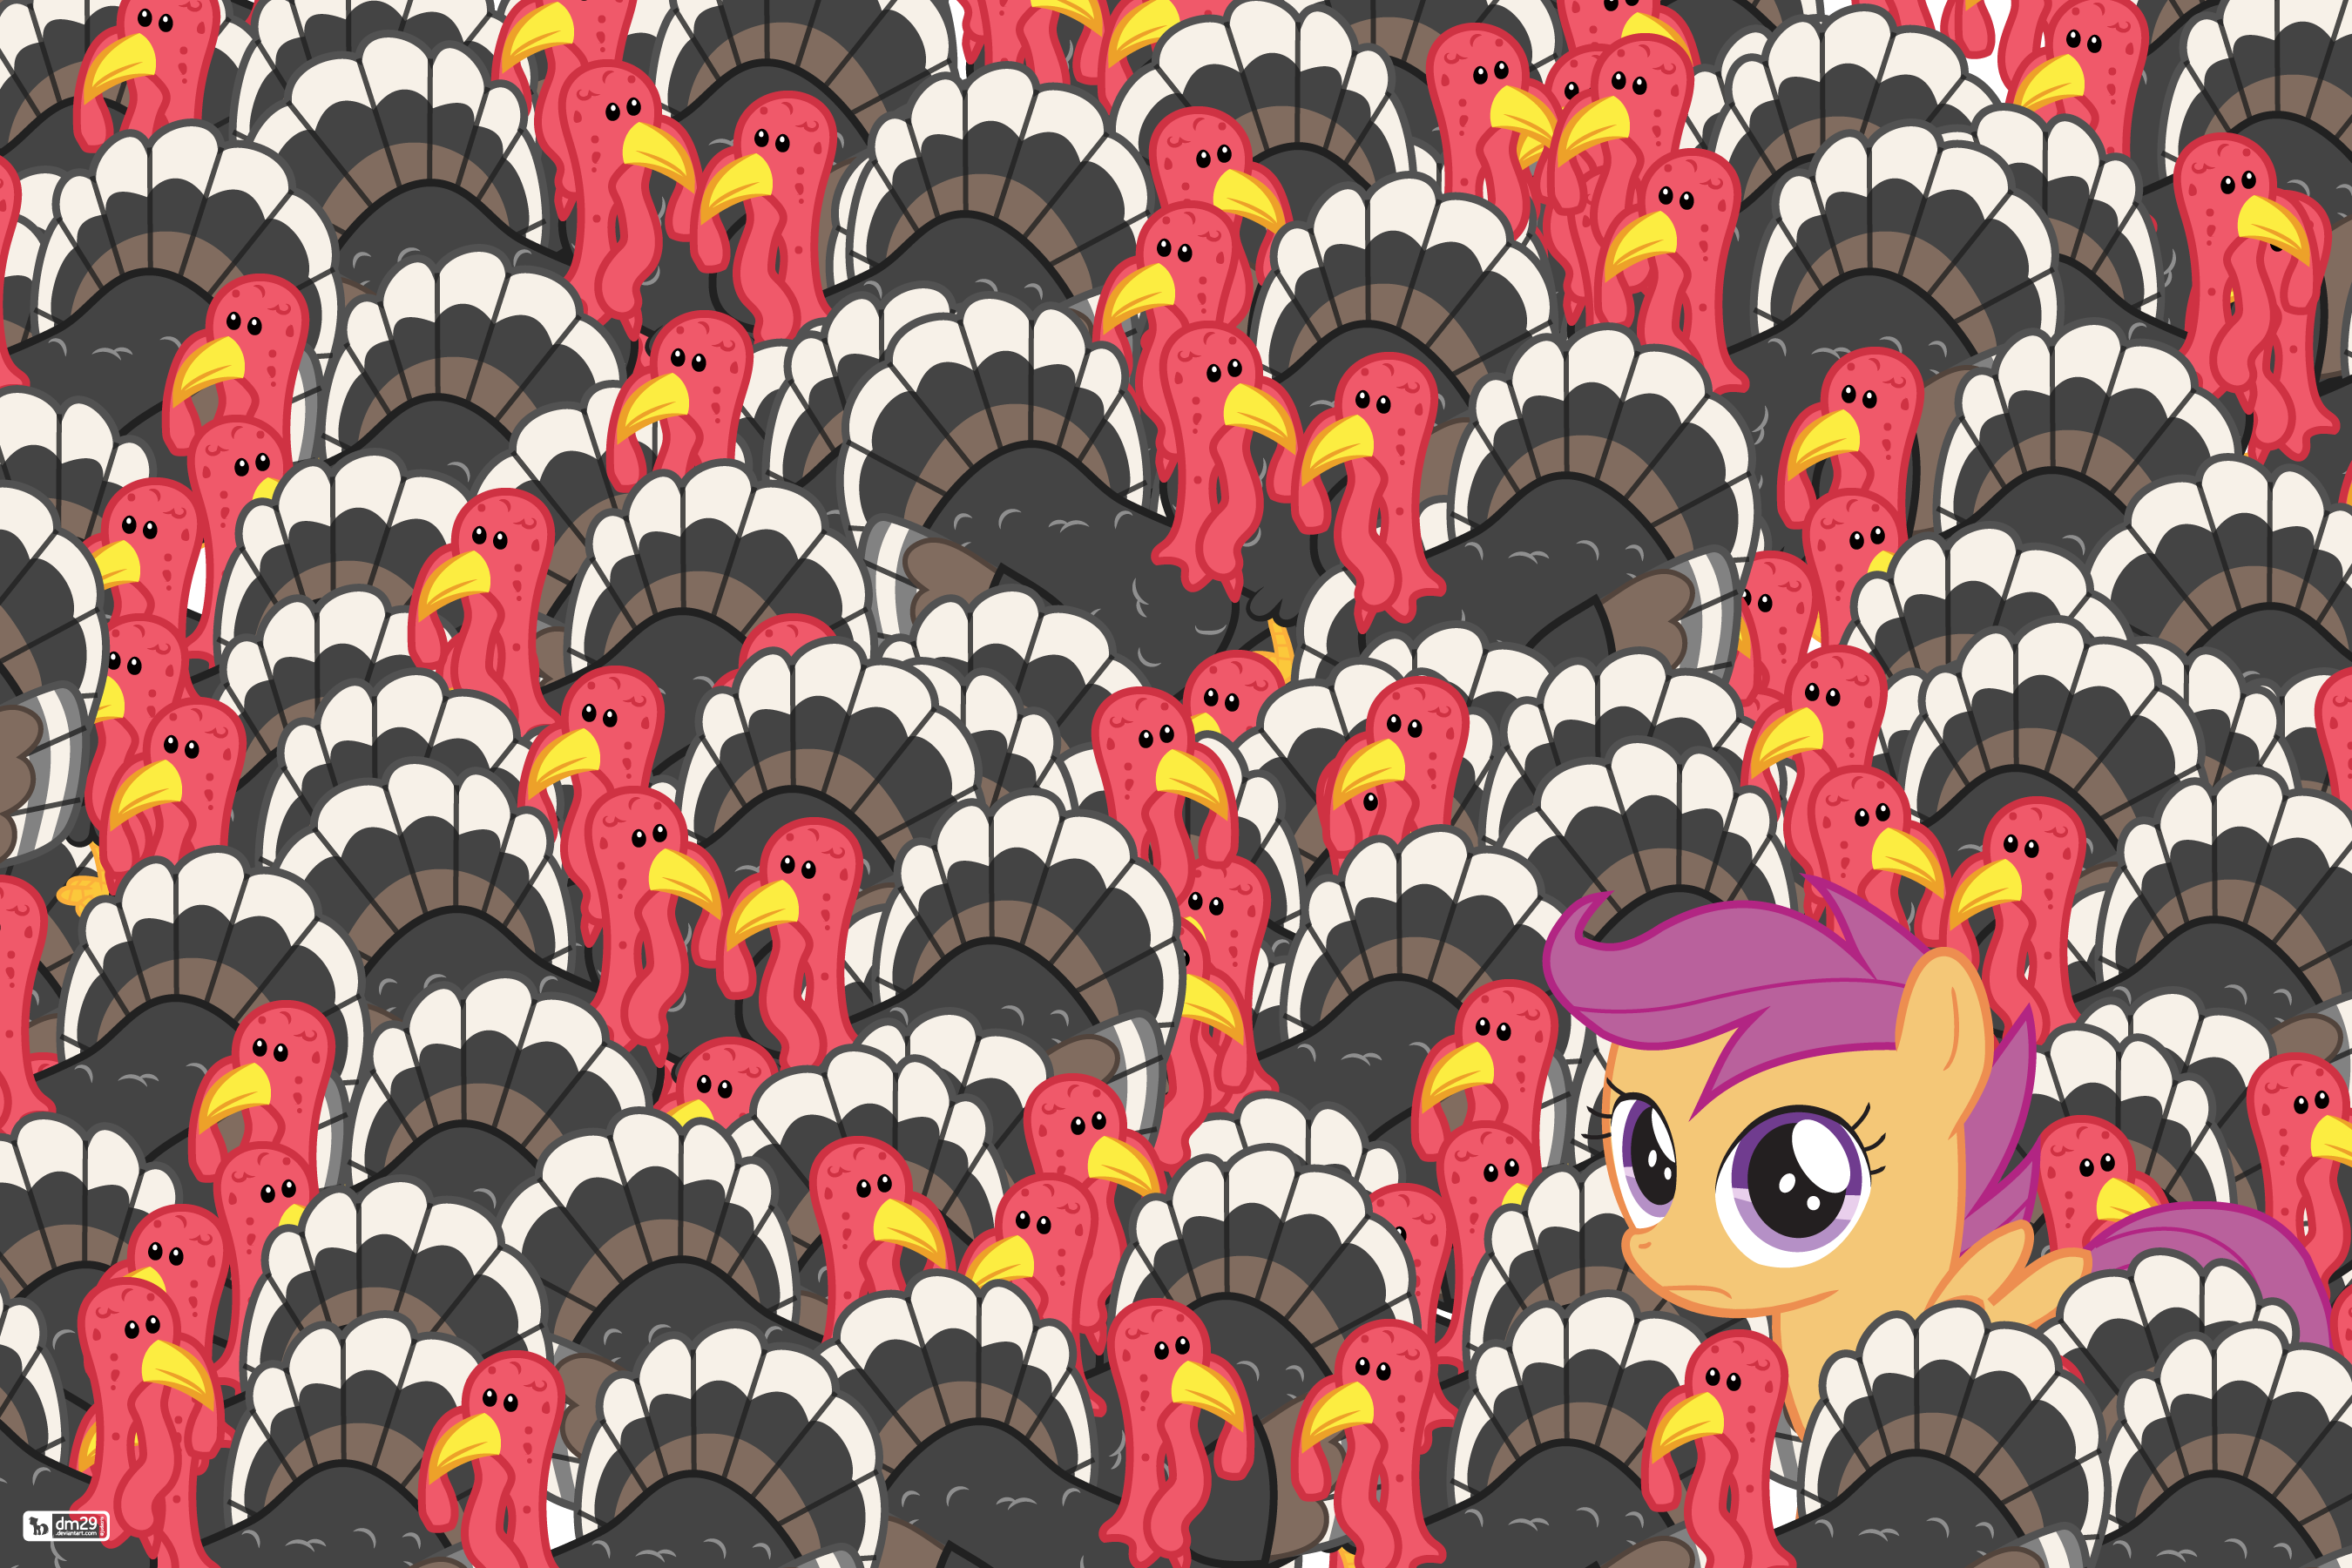 https://derpicdn.net/img/view/2016/12/7/1311846__safe_scootaloo_wallpaper_artist-colon-dm29_scootachicken_turkey_one+of+these+things+is+not+like+the+others.png